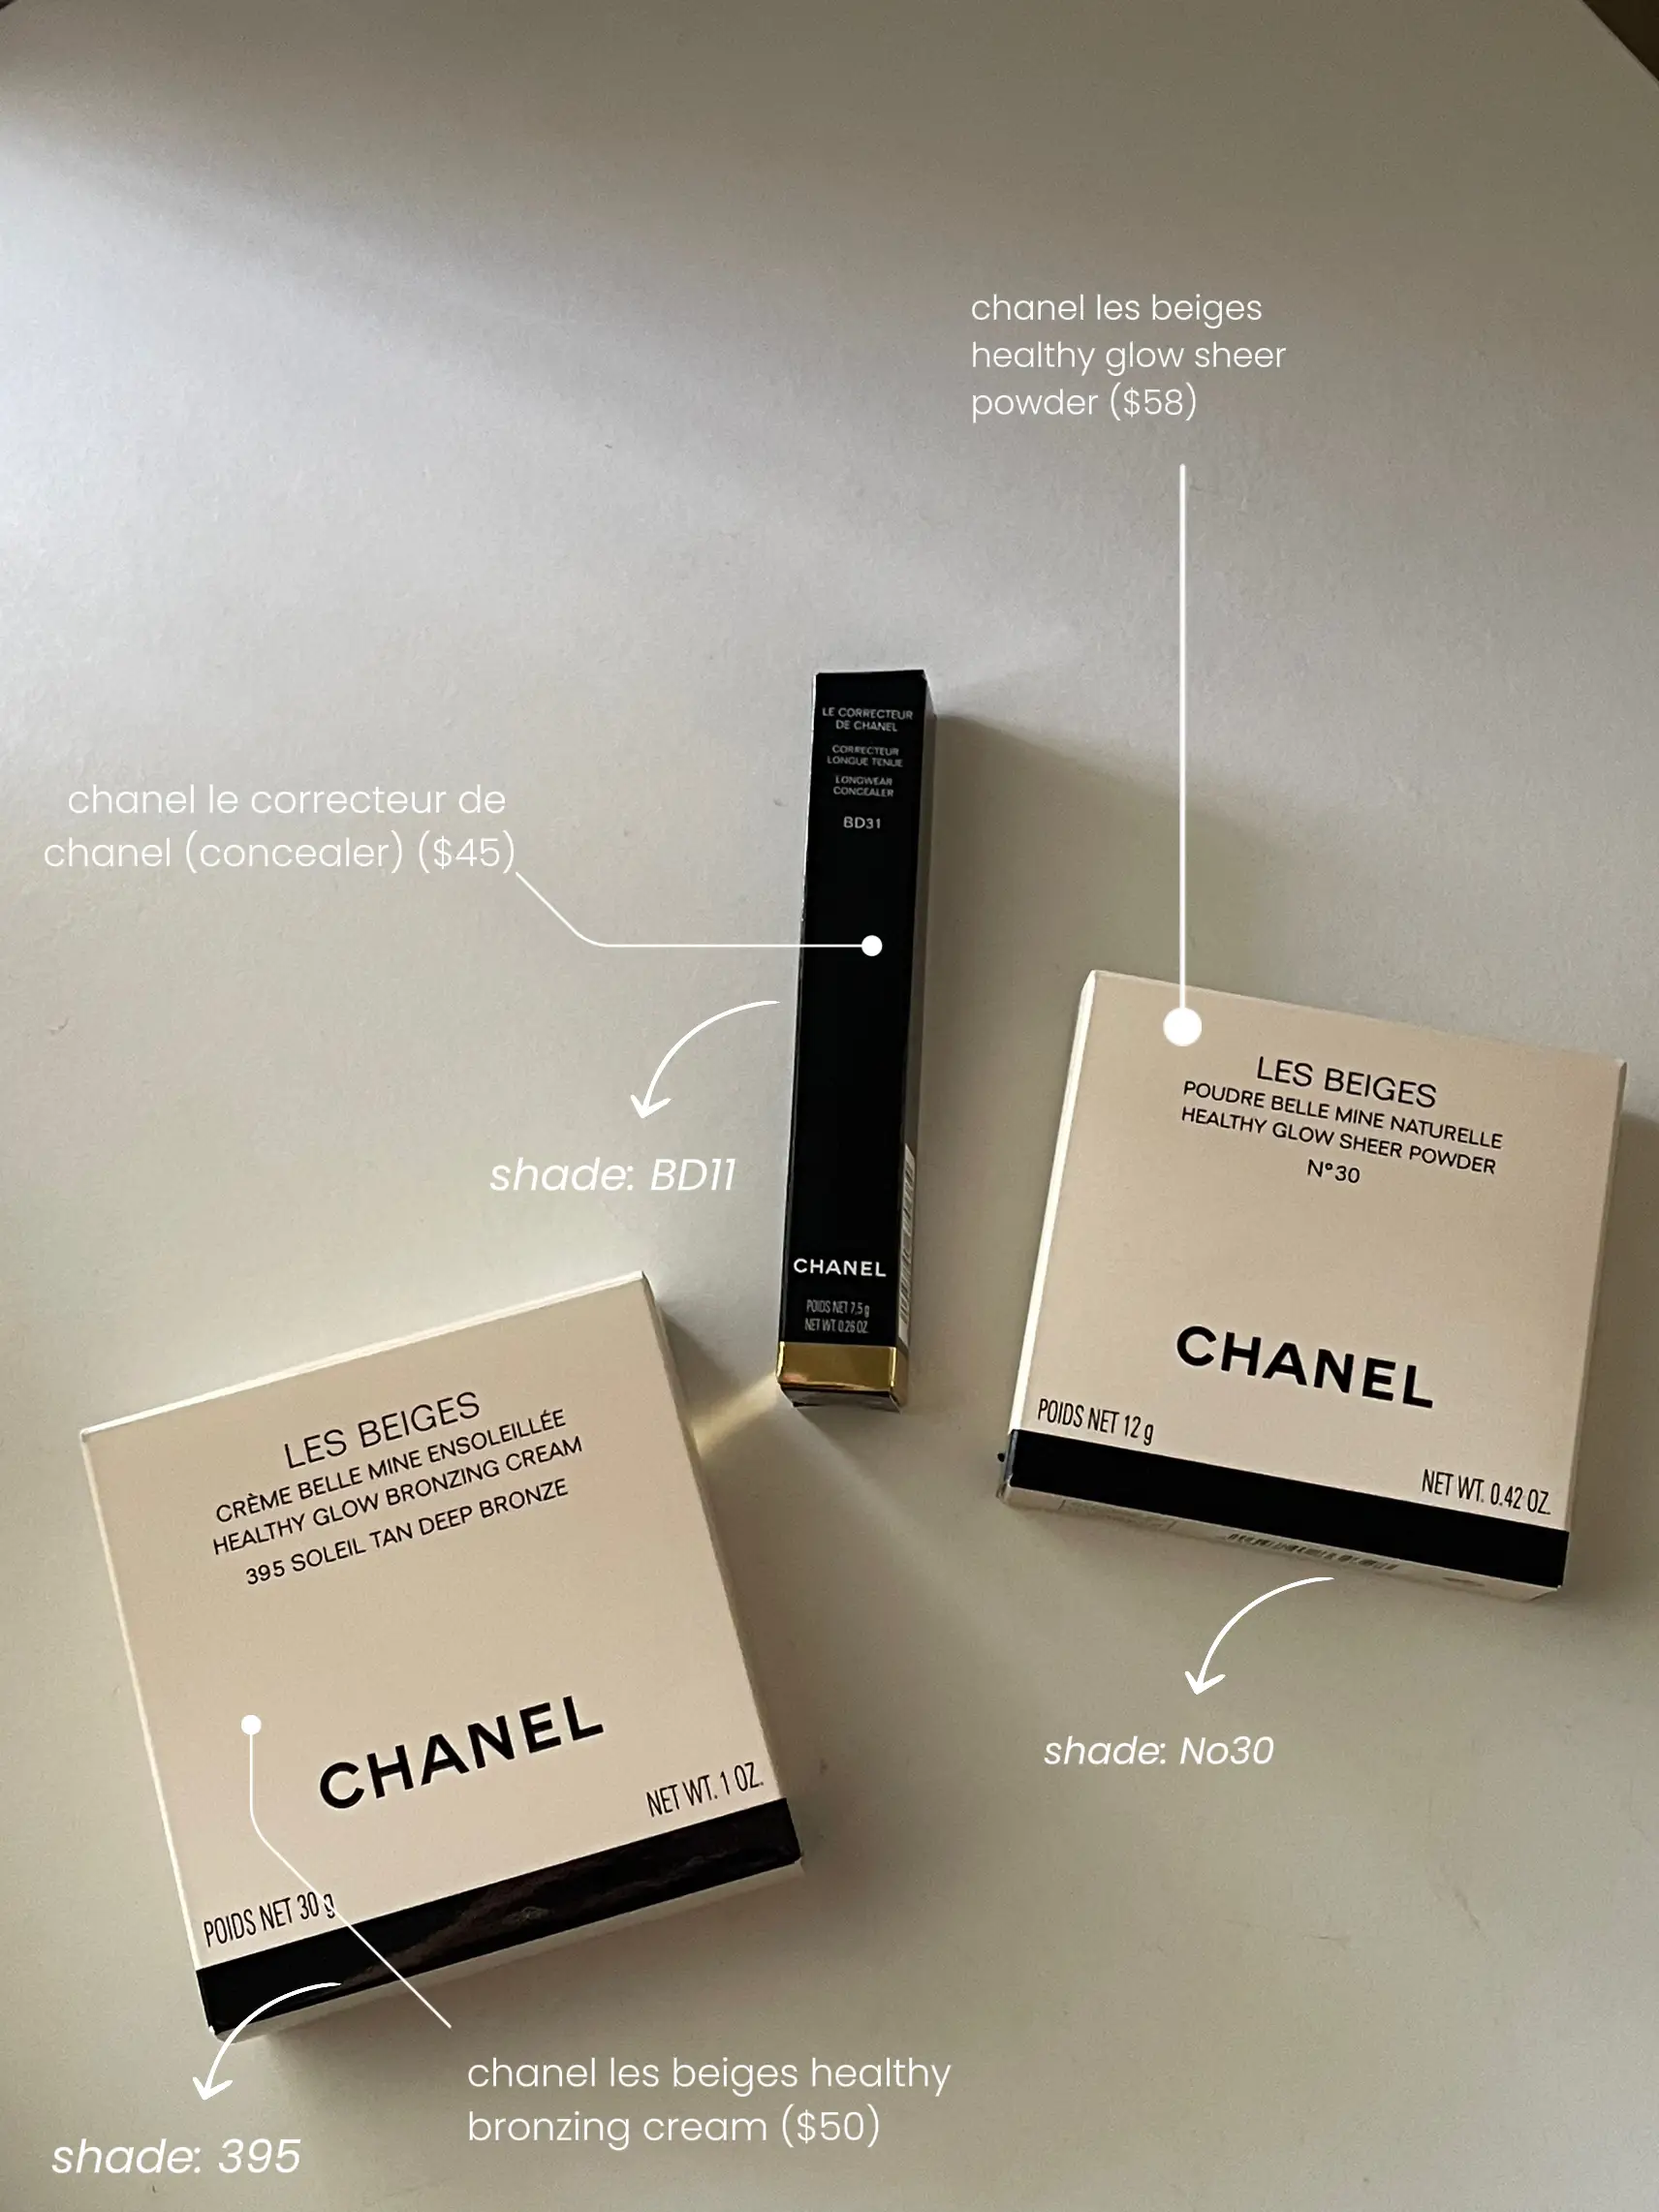 Chanel Blush Stick Review and Photos - The Skincare Edit